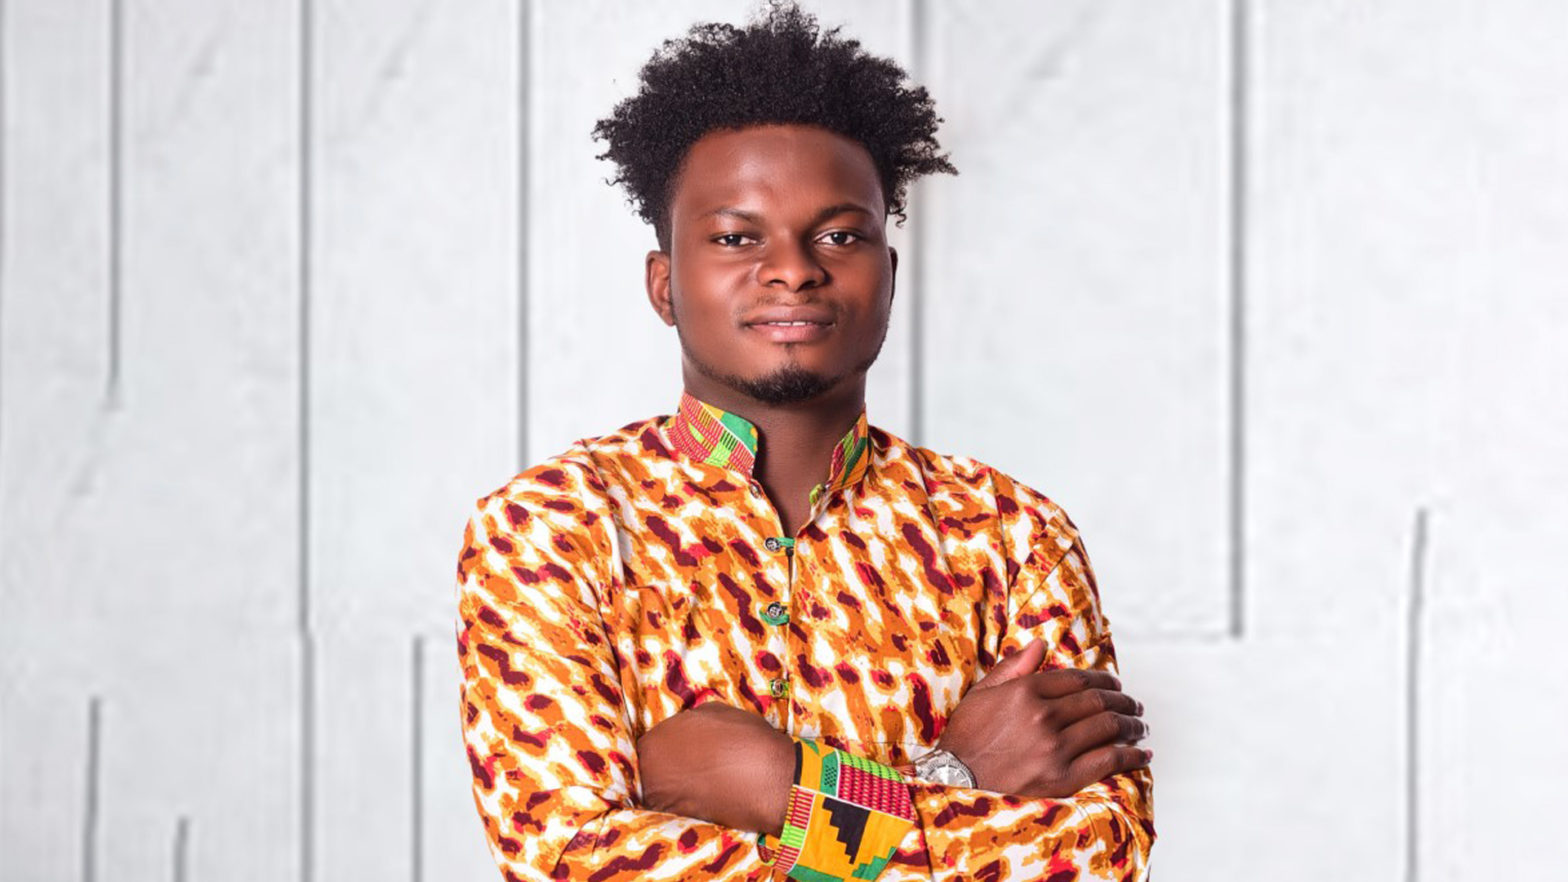 21-Year-Old Sierra Leonean Student Wins $100K Prize For His Efforts To Combat Energy Poverty